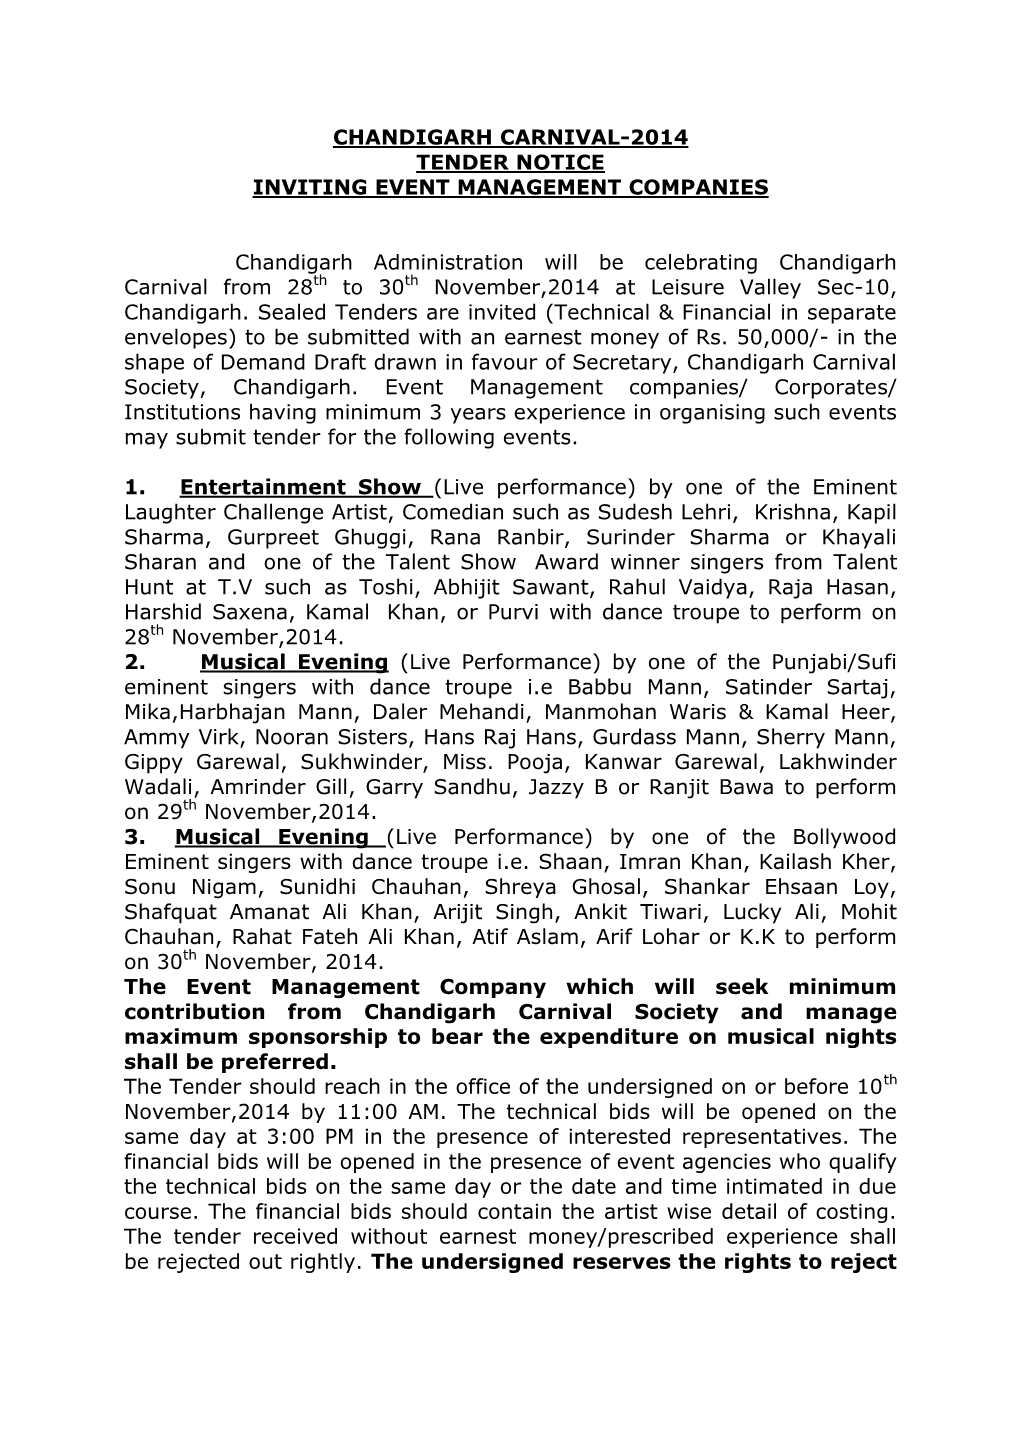 Chandigarh Carnival-2014 Tender Notice Inviting Event Management Companies